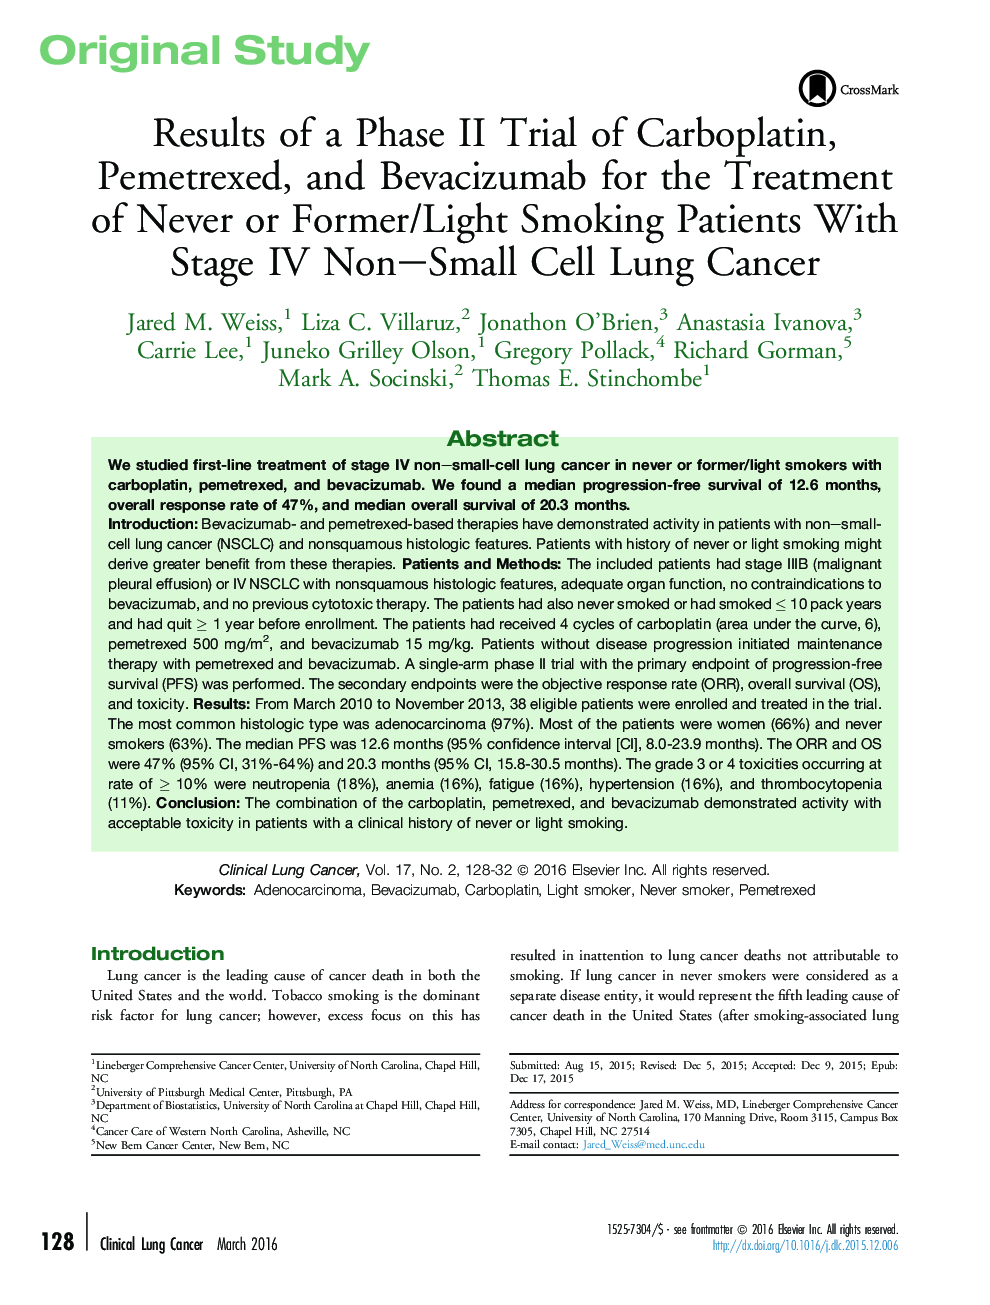 Original StudyResults of a Phase II Trial of Carboplatin, Pemetrexed, and Bevacizumab for the Treatment of Never or Former/Light Smoking Patients With Stage IV Non-Small Cell Lung Cancer